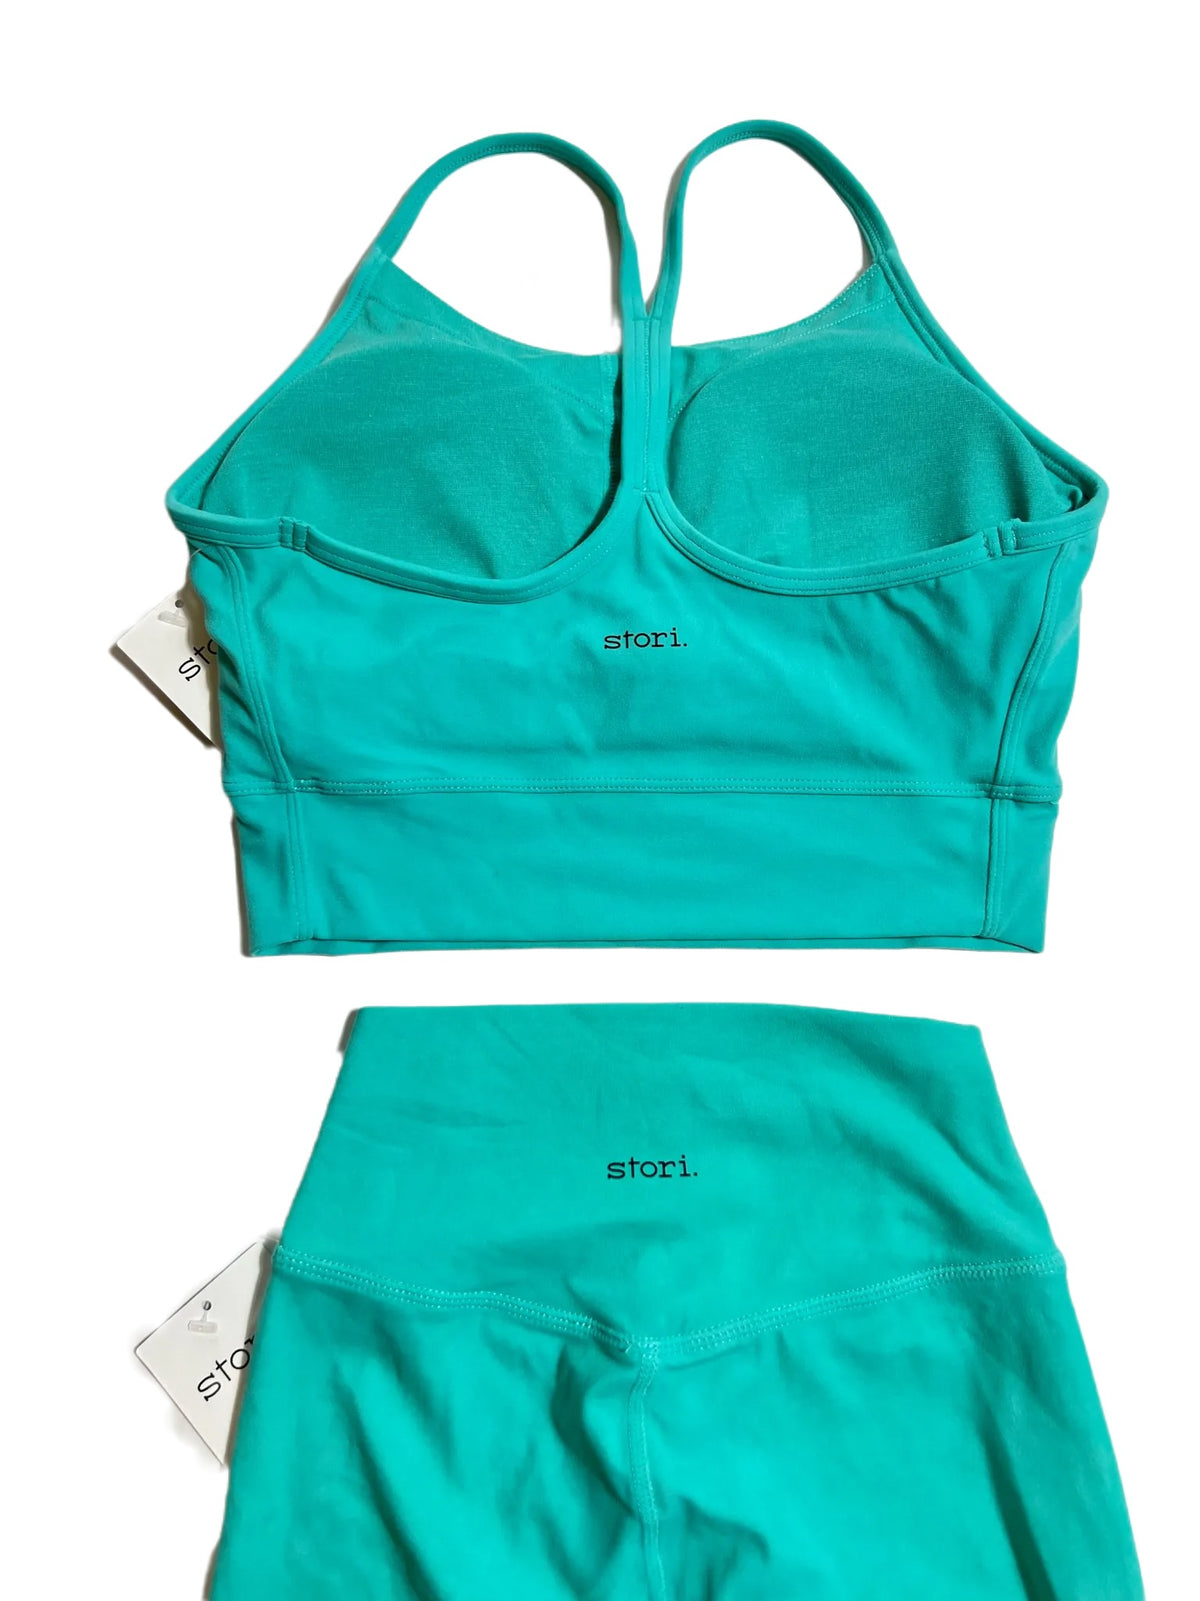 Stori- Teal Legging Matching Set New With Tags!